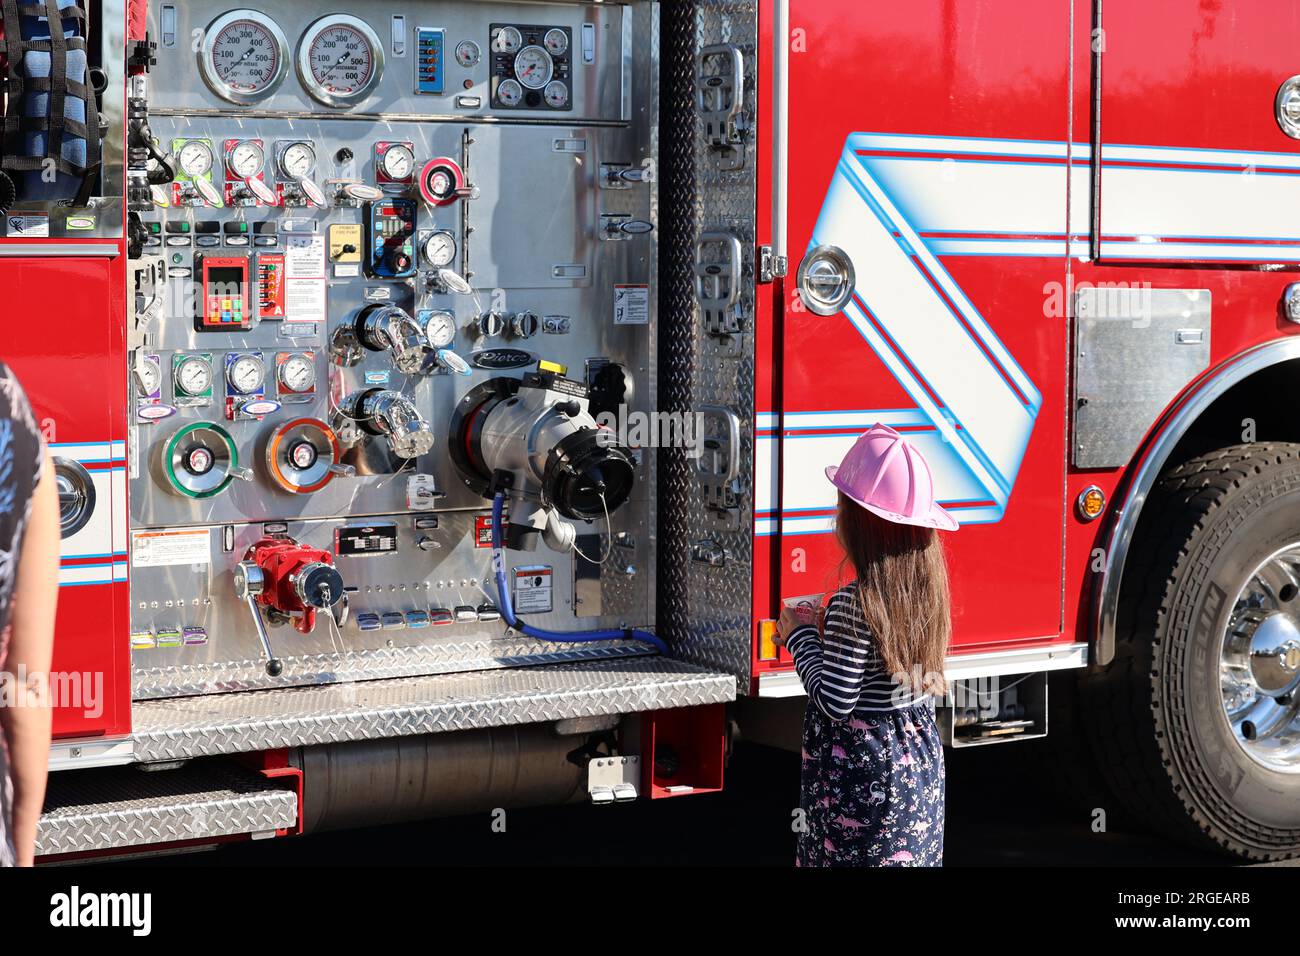 Little girl looking at a fire truck Stock Photo